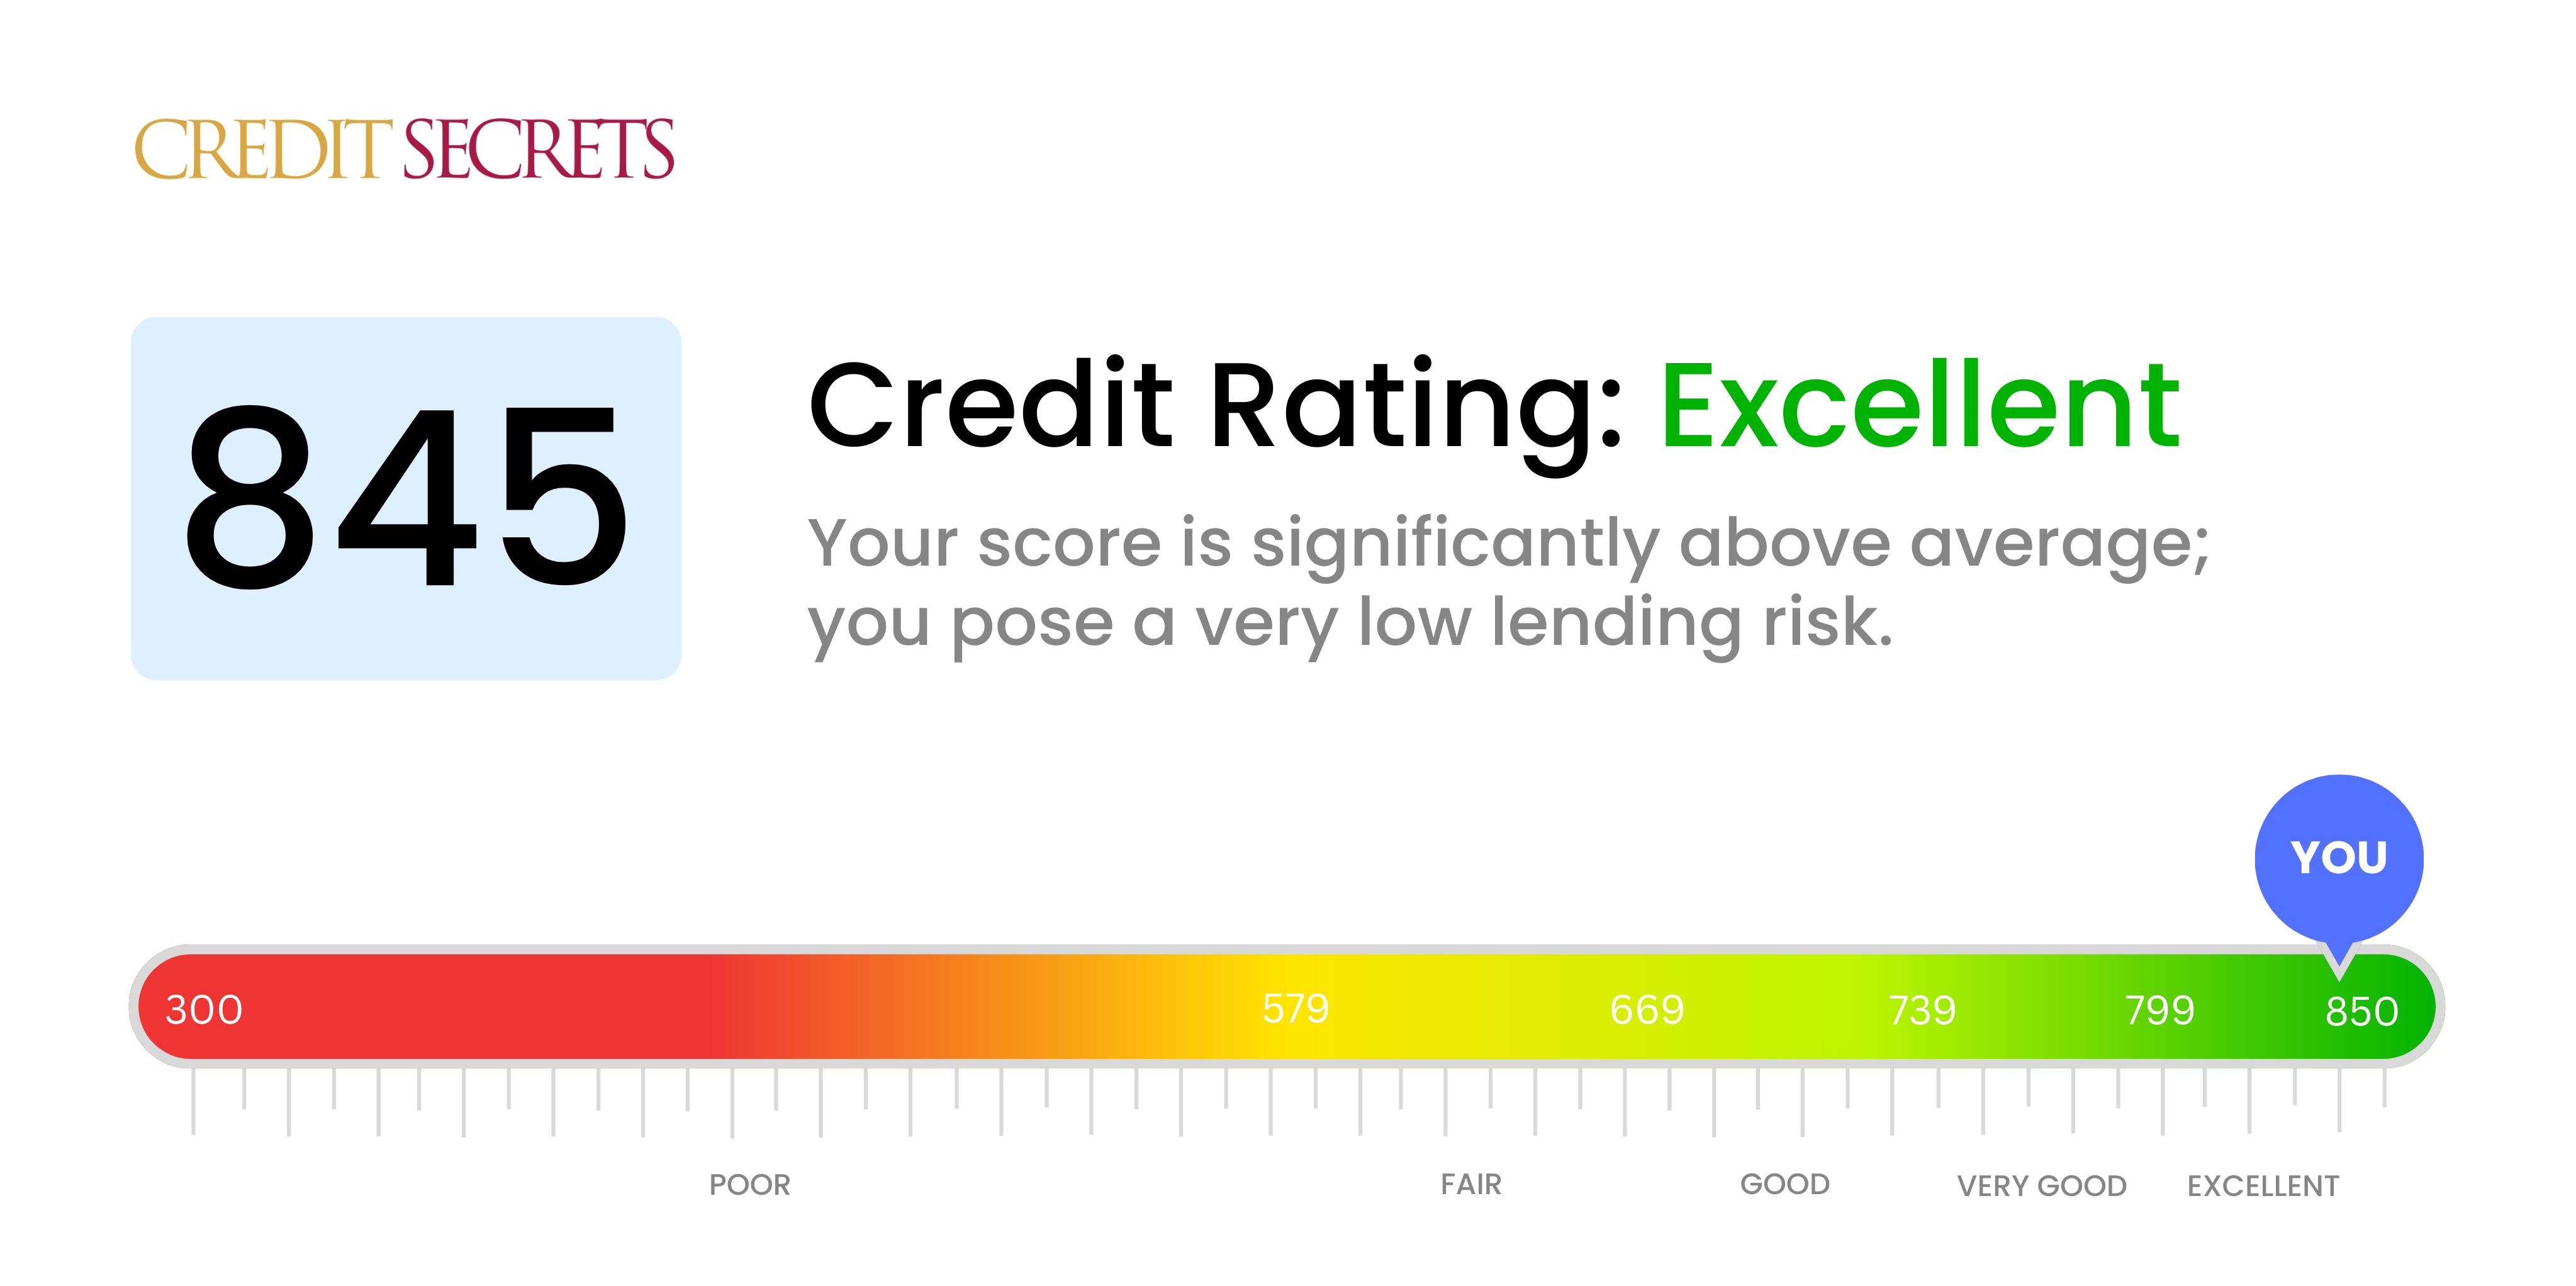 Is 845 a good credit score?